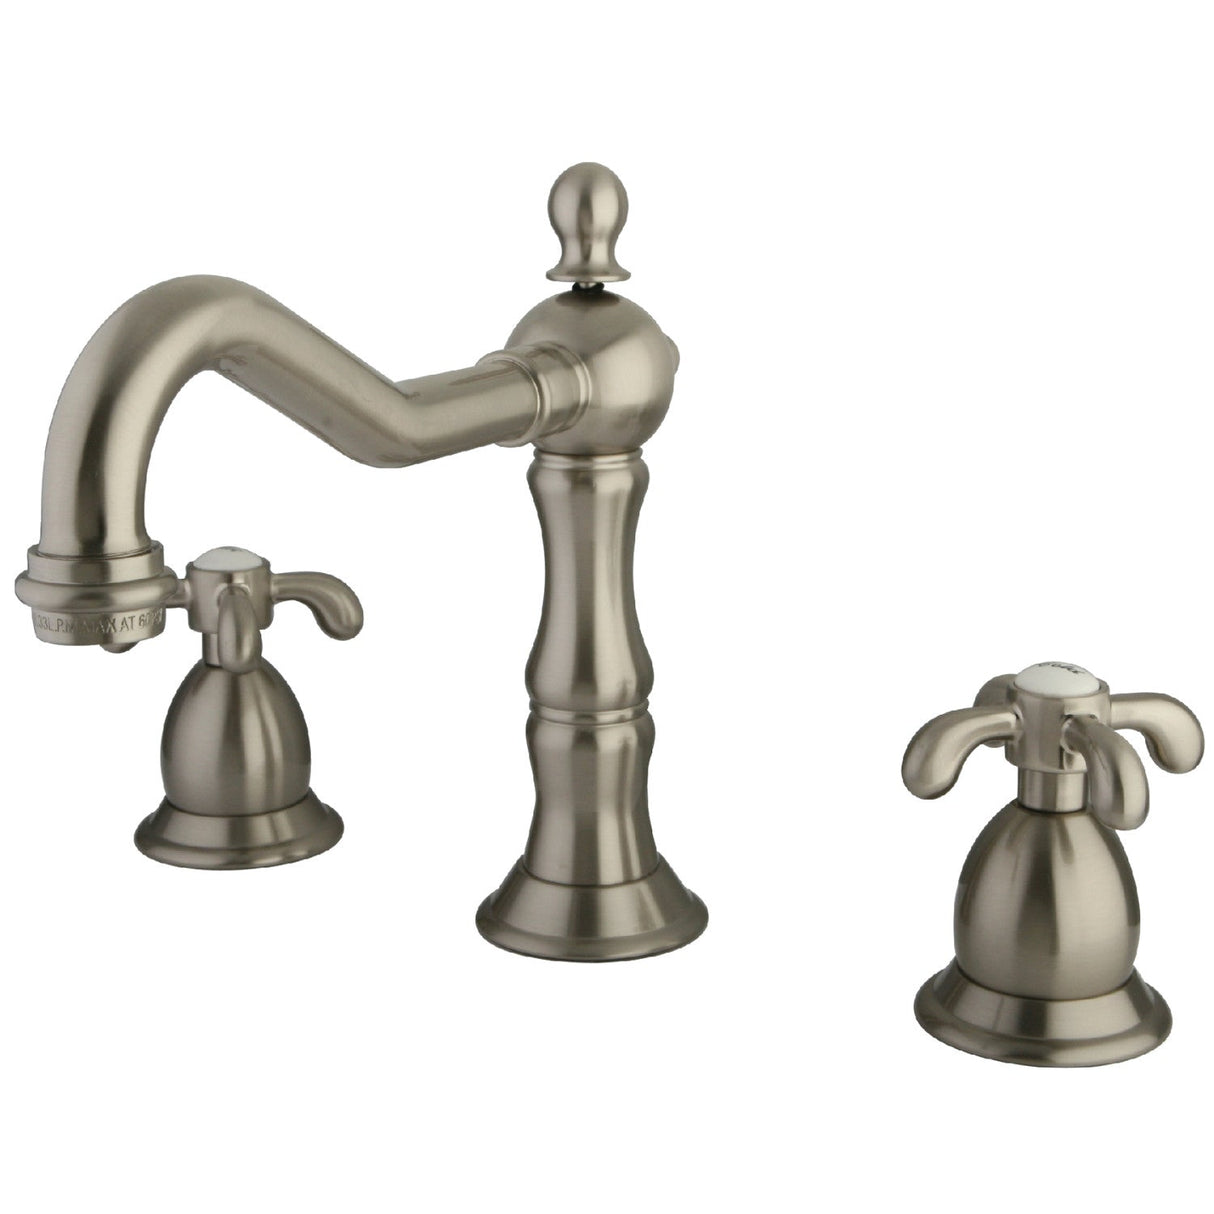 French Country KS1978TX Two-Handle 3-Hole Deck Mount Widespread Bathroom Faucet with Brass Pop-Up, Brushed Nickel